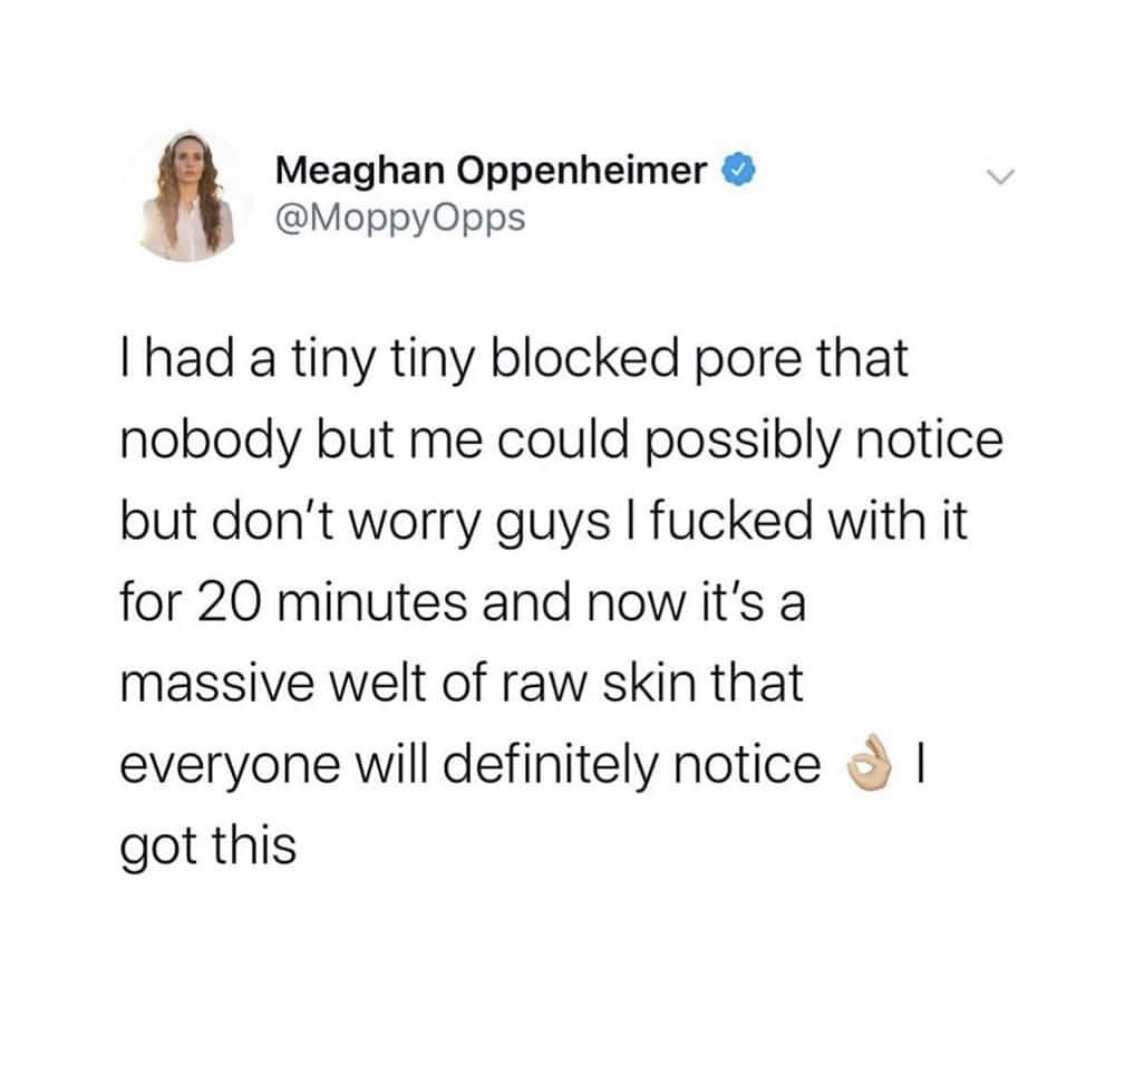 angle - Meaghan Oppenheimer Thad a tiny tiny blocked pore that nobody but me could possibly notice but don't worry guys I fucked with it for 20 minutes and now it's a massive welt of raw skin that everyone will definitely notice al got this